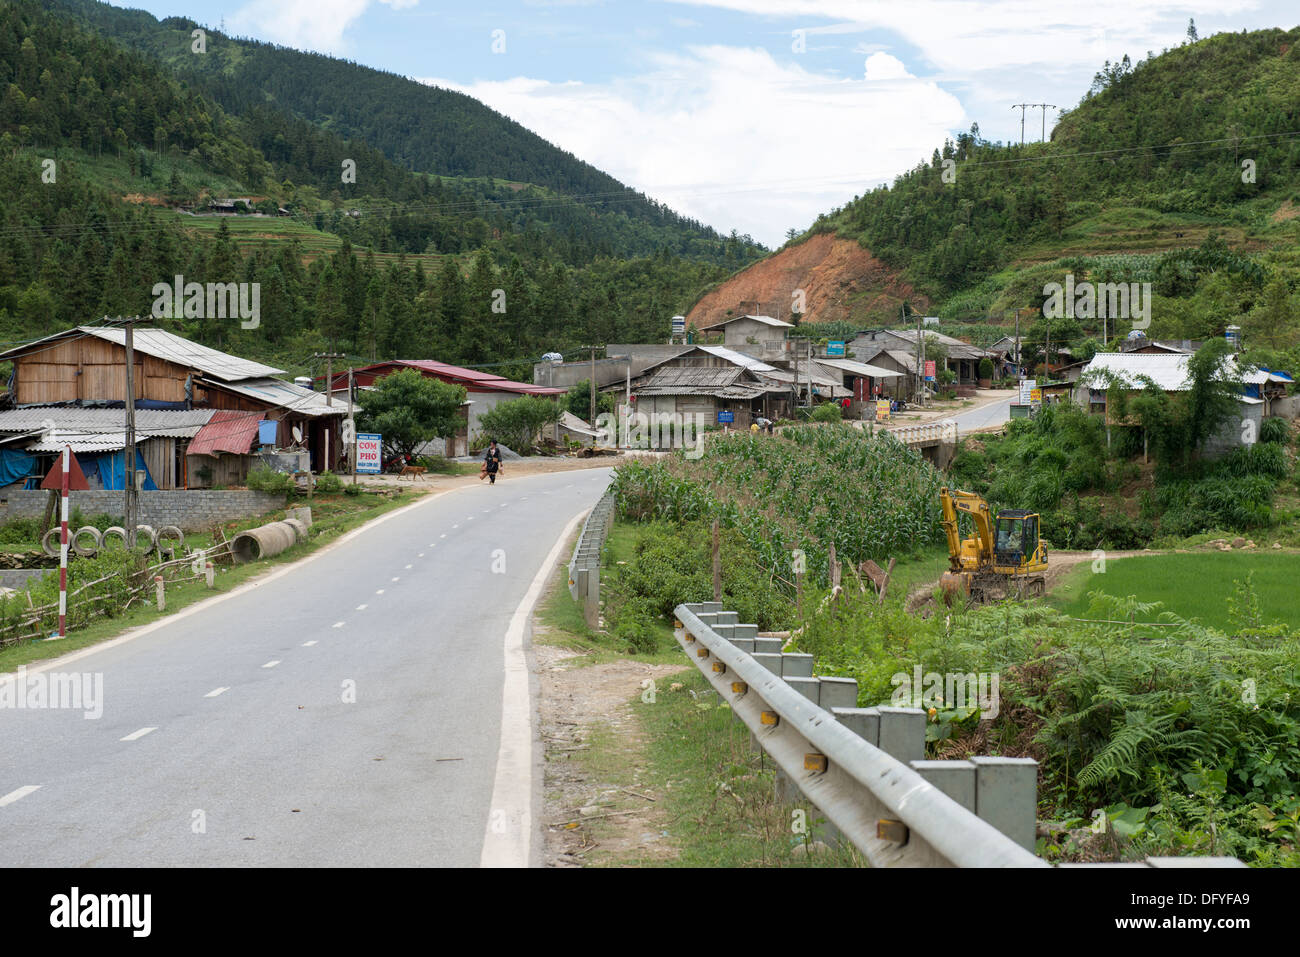 Landscape of rural Sa Pa high land, People make rice terrace and curved path on the mountain. Stock Photo